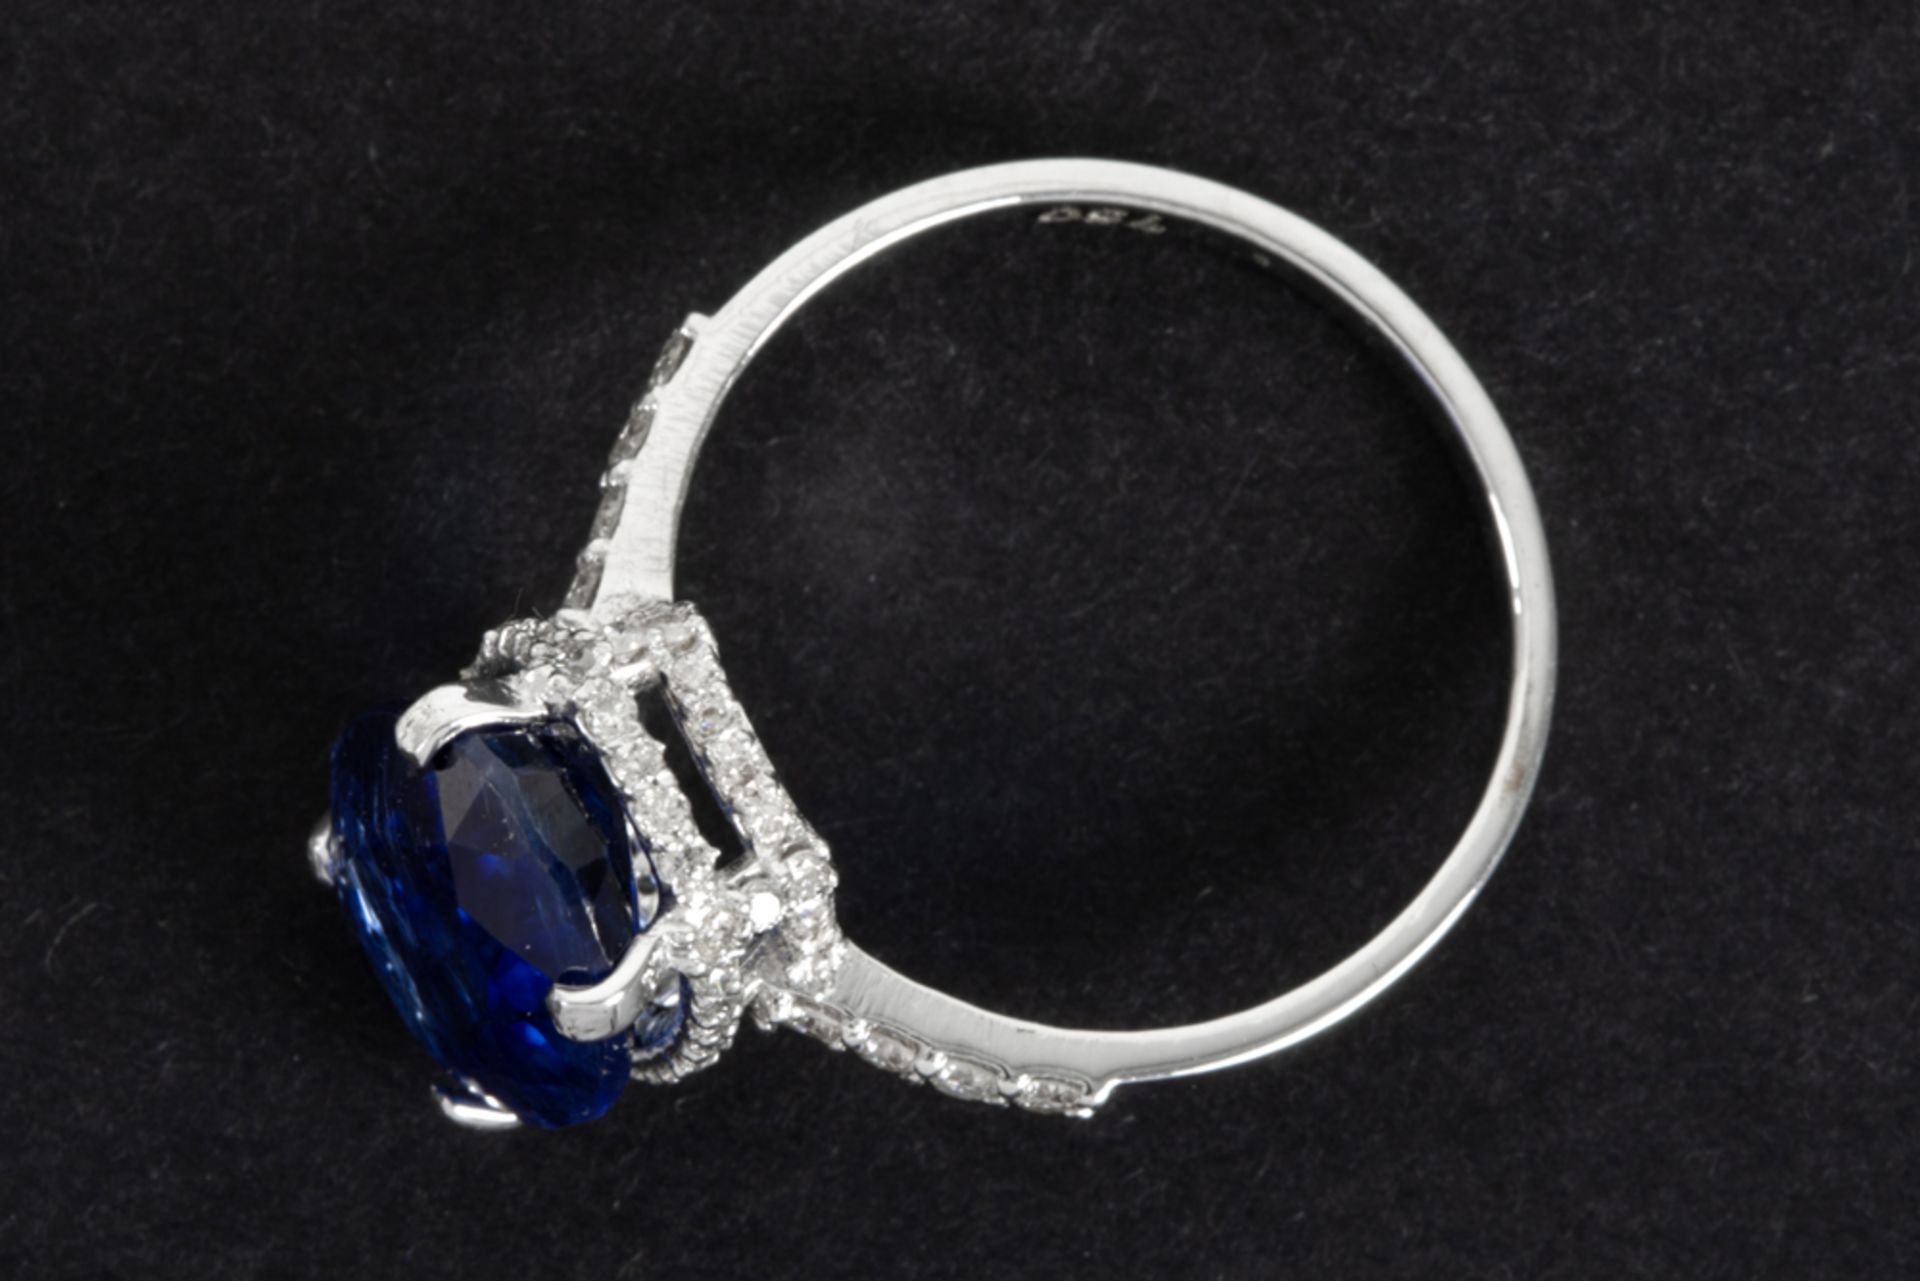 ring in white gold (18 carat) with a central oval ca 6 carat Kianite with a quite rare color, - Image 2 of 2